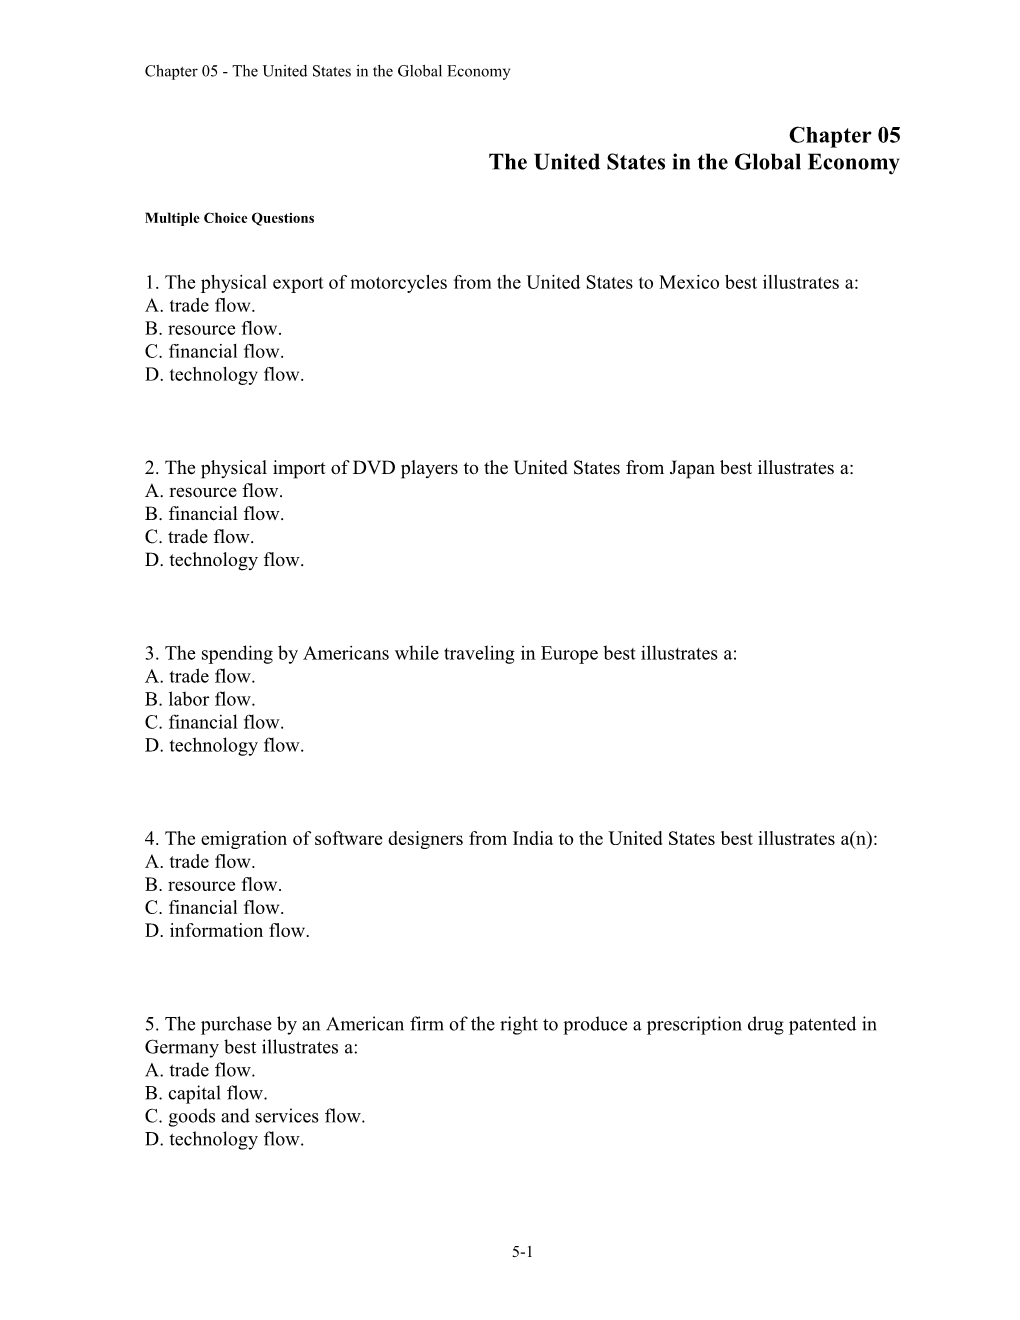 Chapter 05 The United States In The Global Economy:(Multiple Choice Questions)